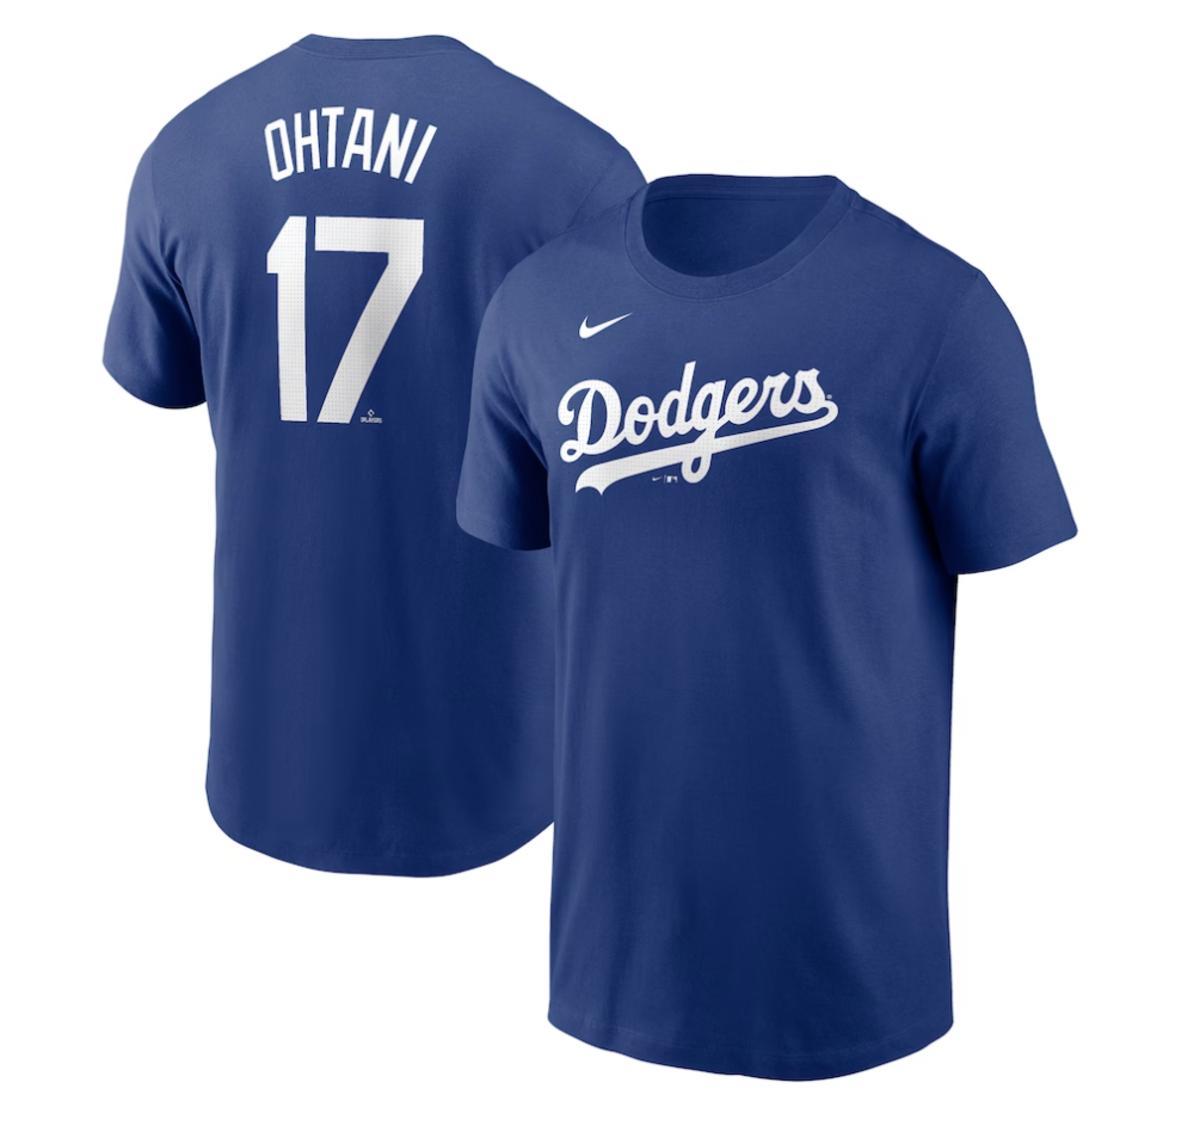 Los Angeles Dodgers Shohei Ohtani Jersey, how to buy your Ohtani ...